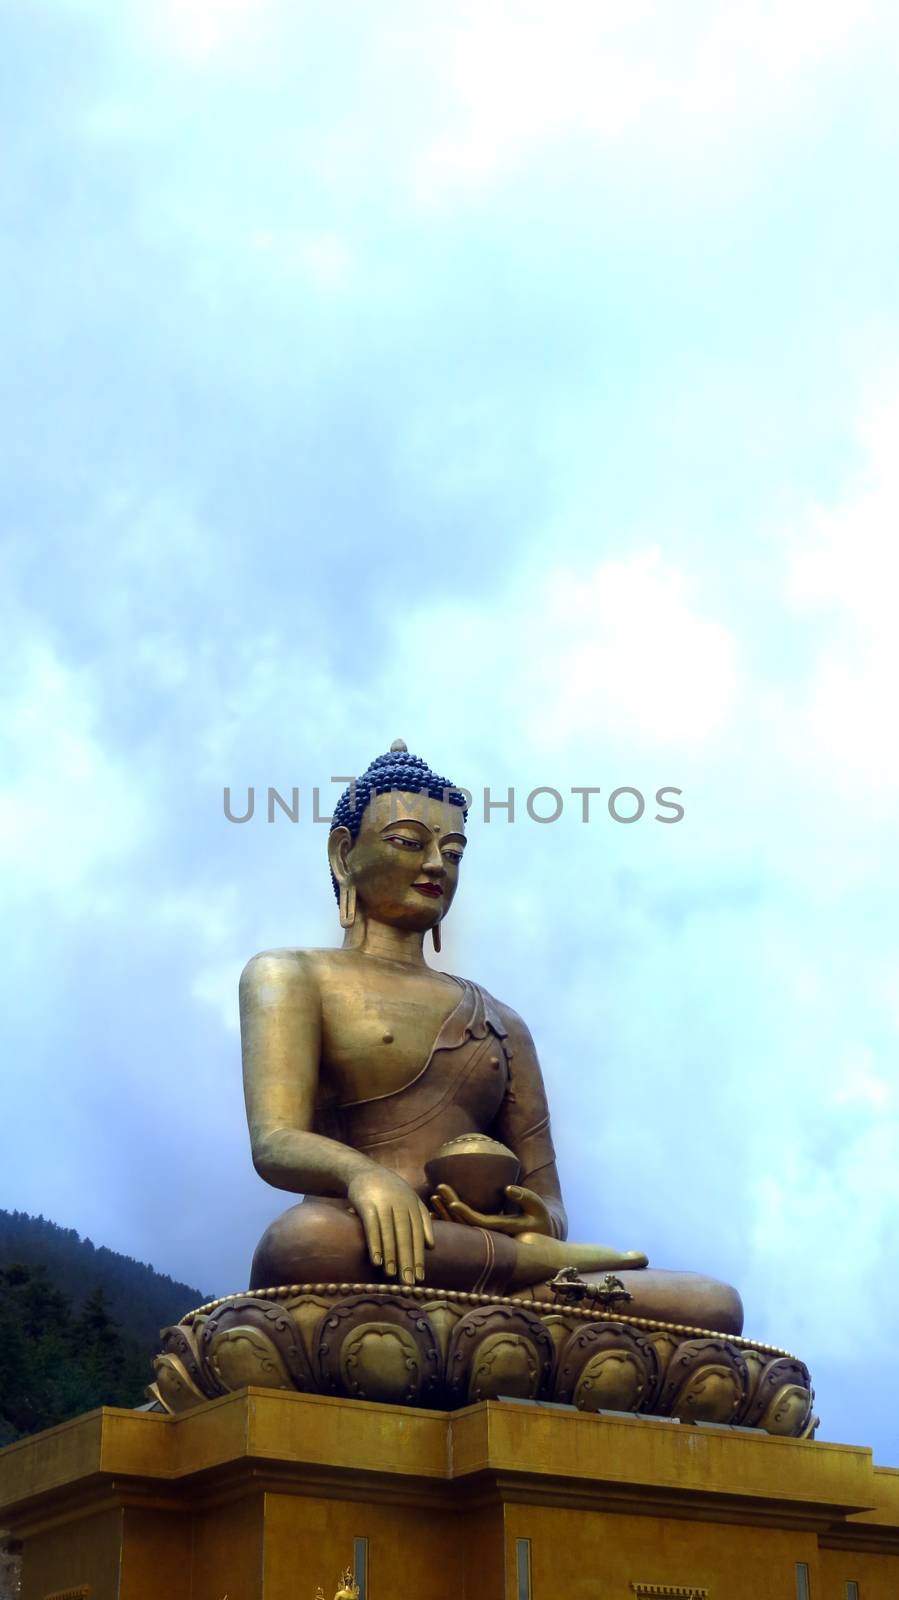 The Buddha Dordenma with the tallest statue of Buddha towering over a beautiful value in Thimpu, Bhutan.